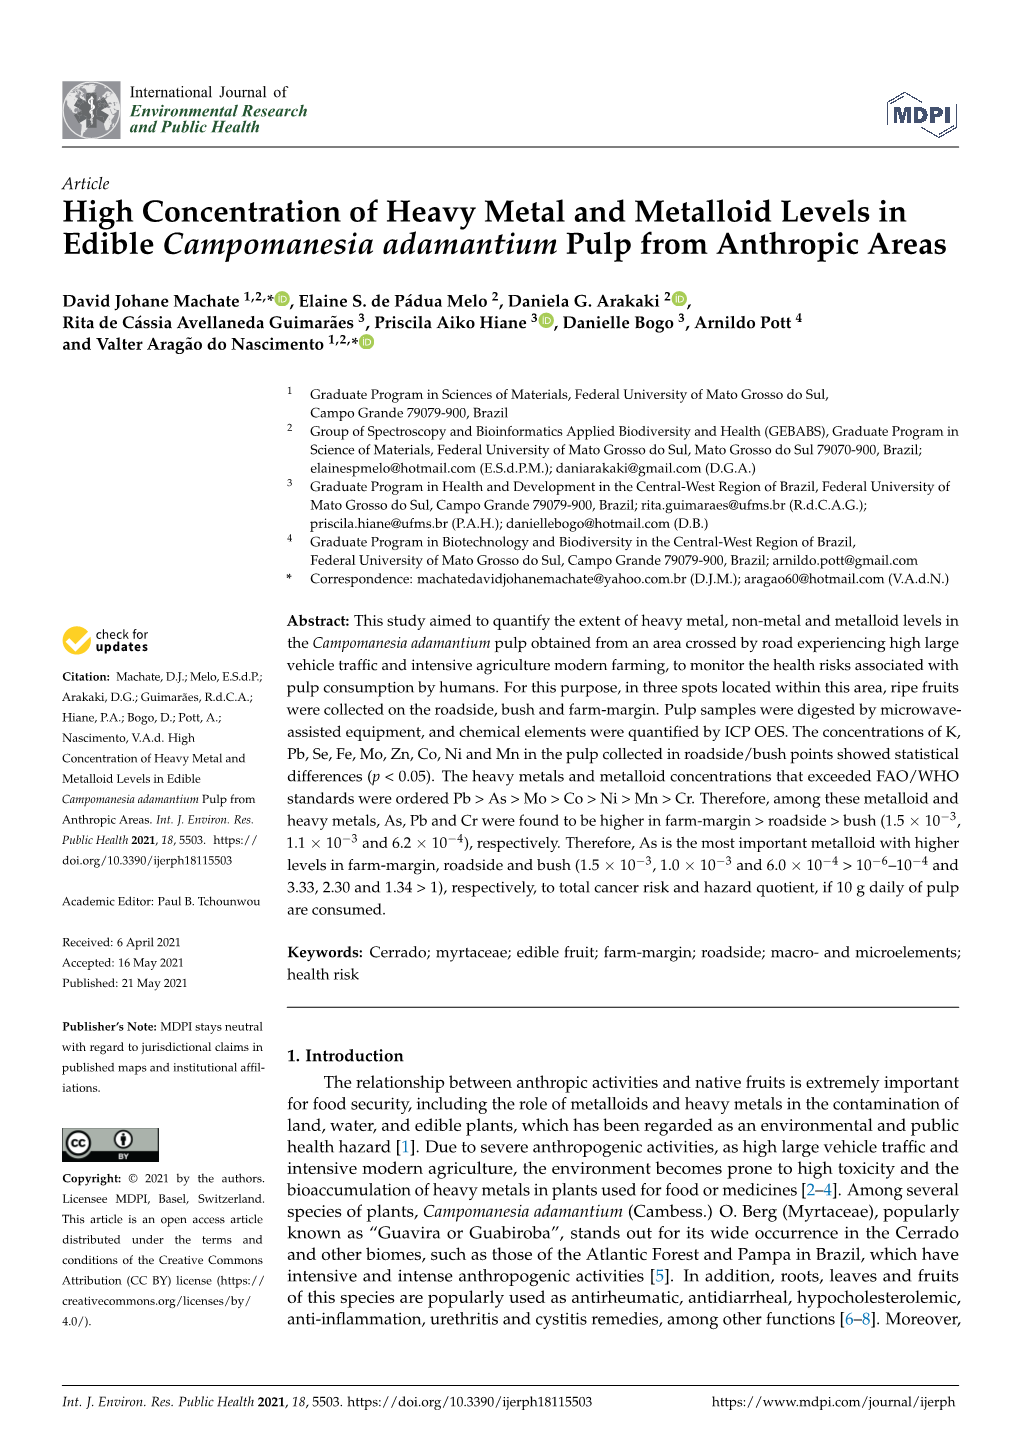 High Concentration of Heavy Metal and Metalloid Levels in Edible Campomanesia Adamantium Pulp from Anthropic Areas